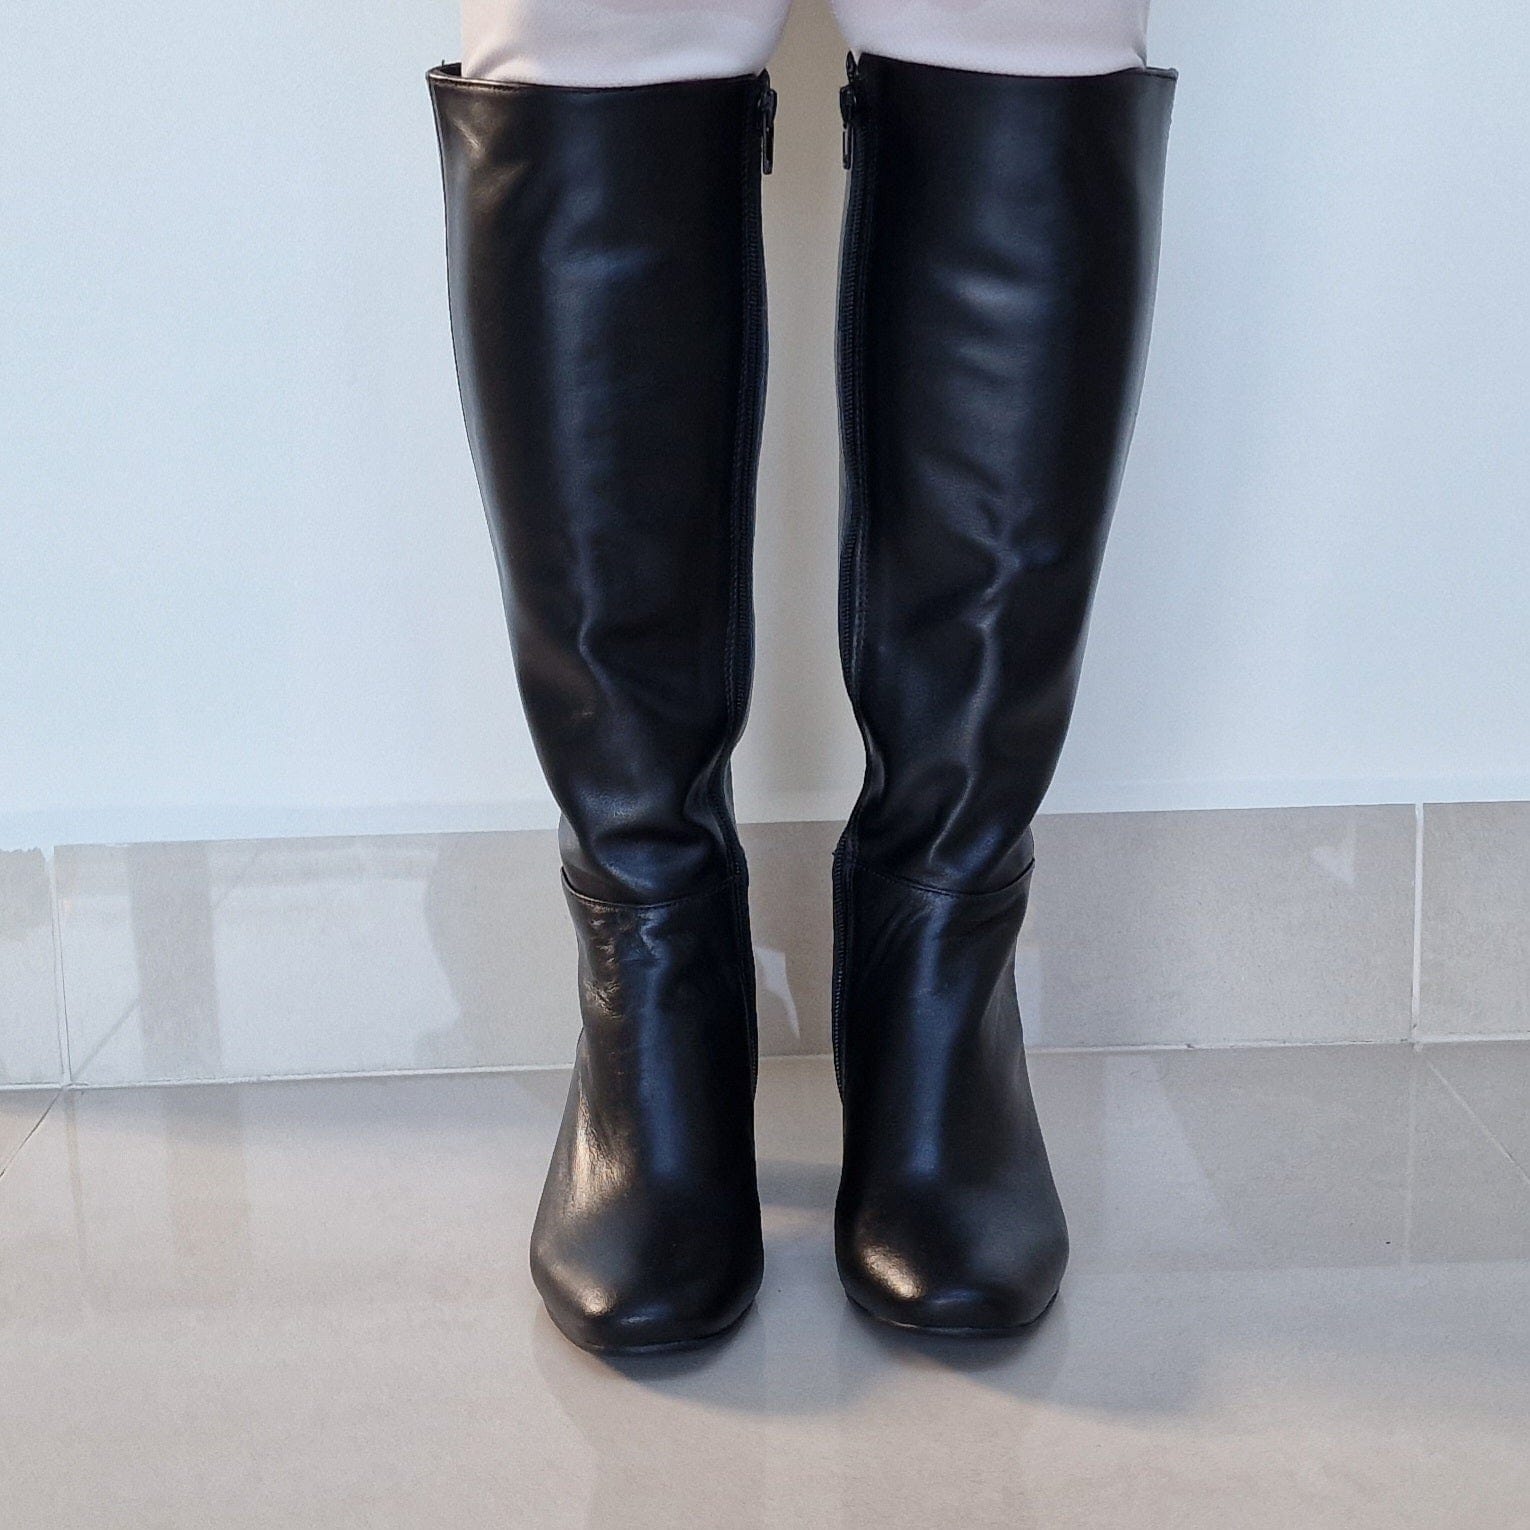 Black leather knee high boots in small size